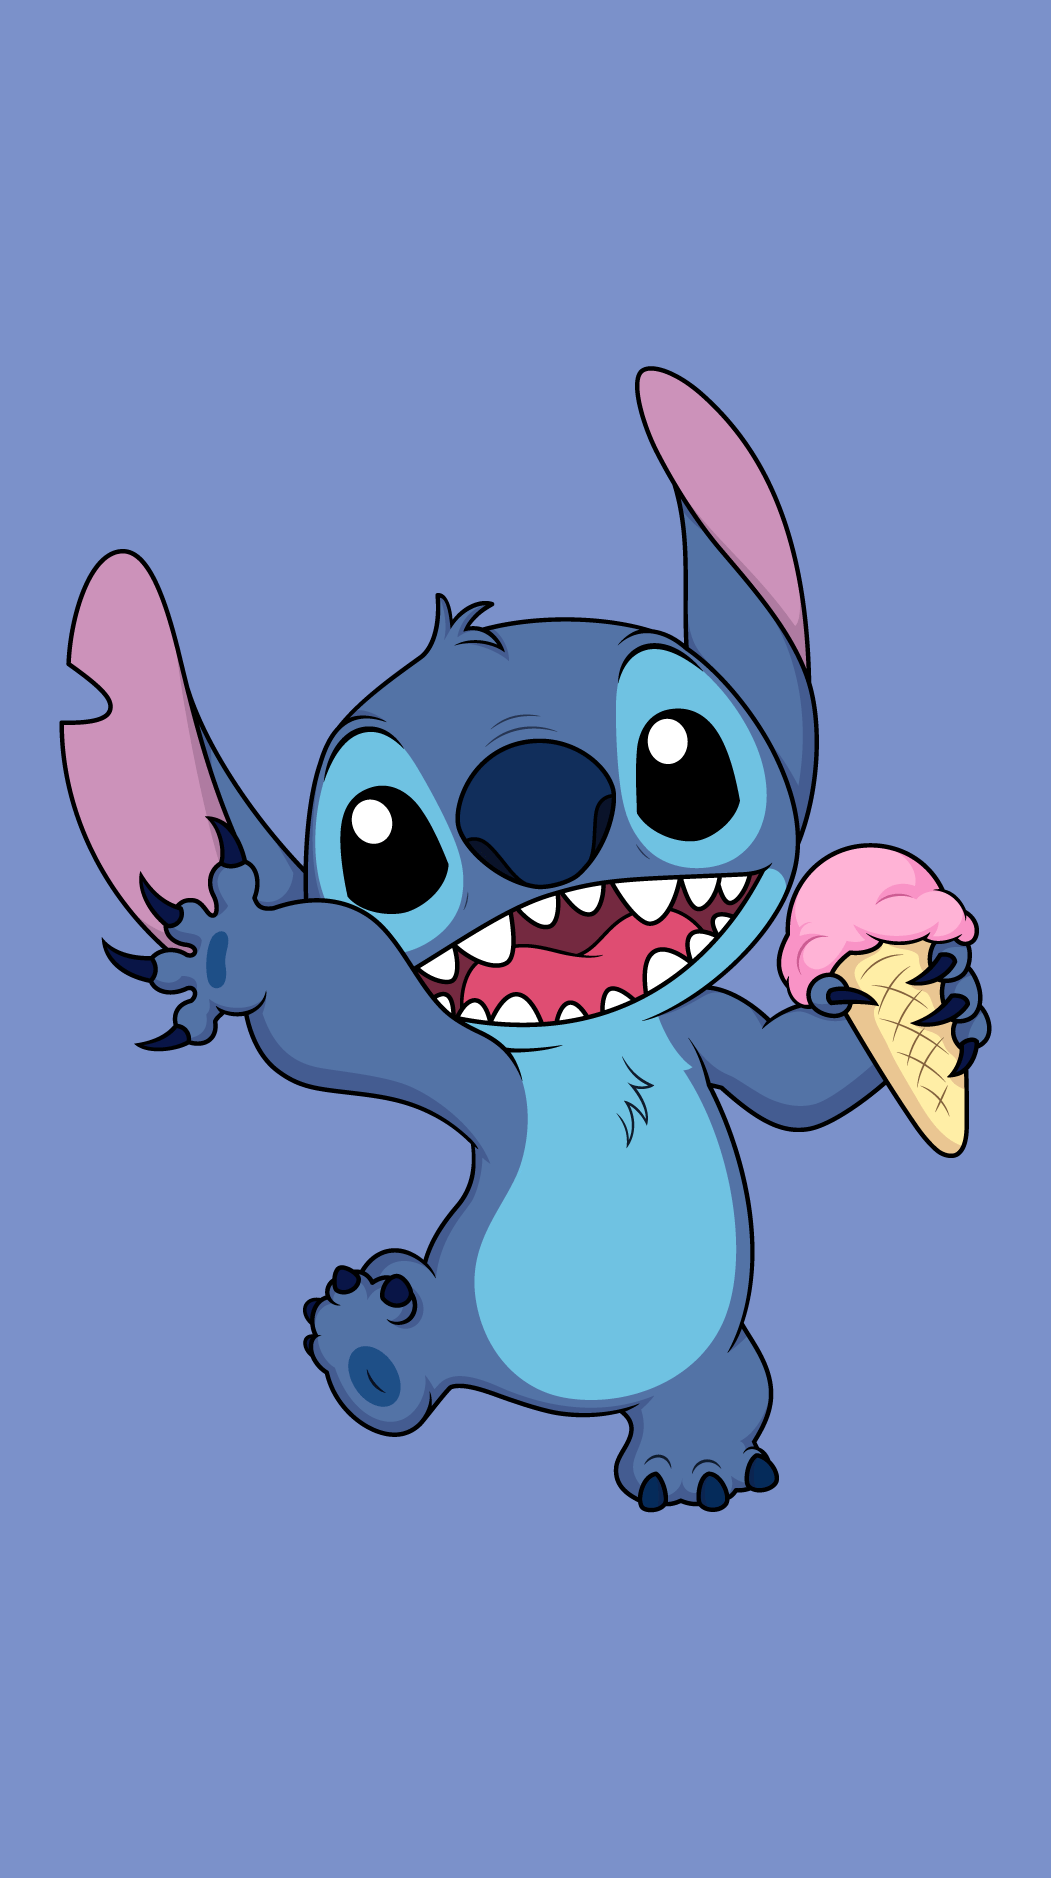 Pin by Silvia Porras on Diseños de Camisas | Lilo and stitch drawings,  Stitch drawing, Cute disney wallpaper